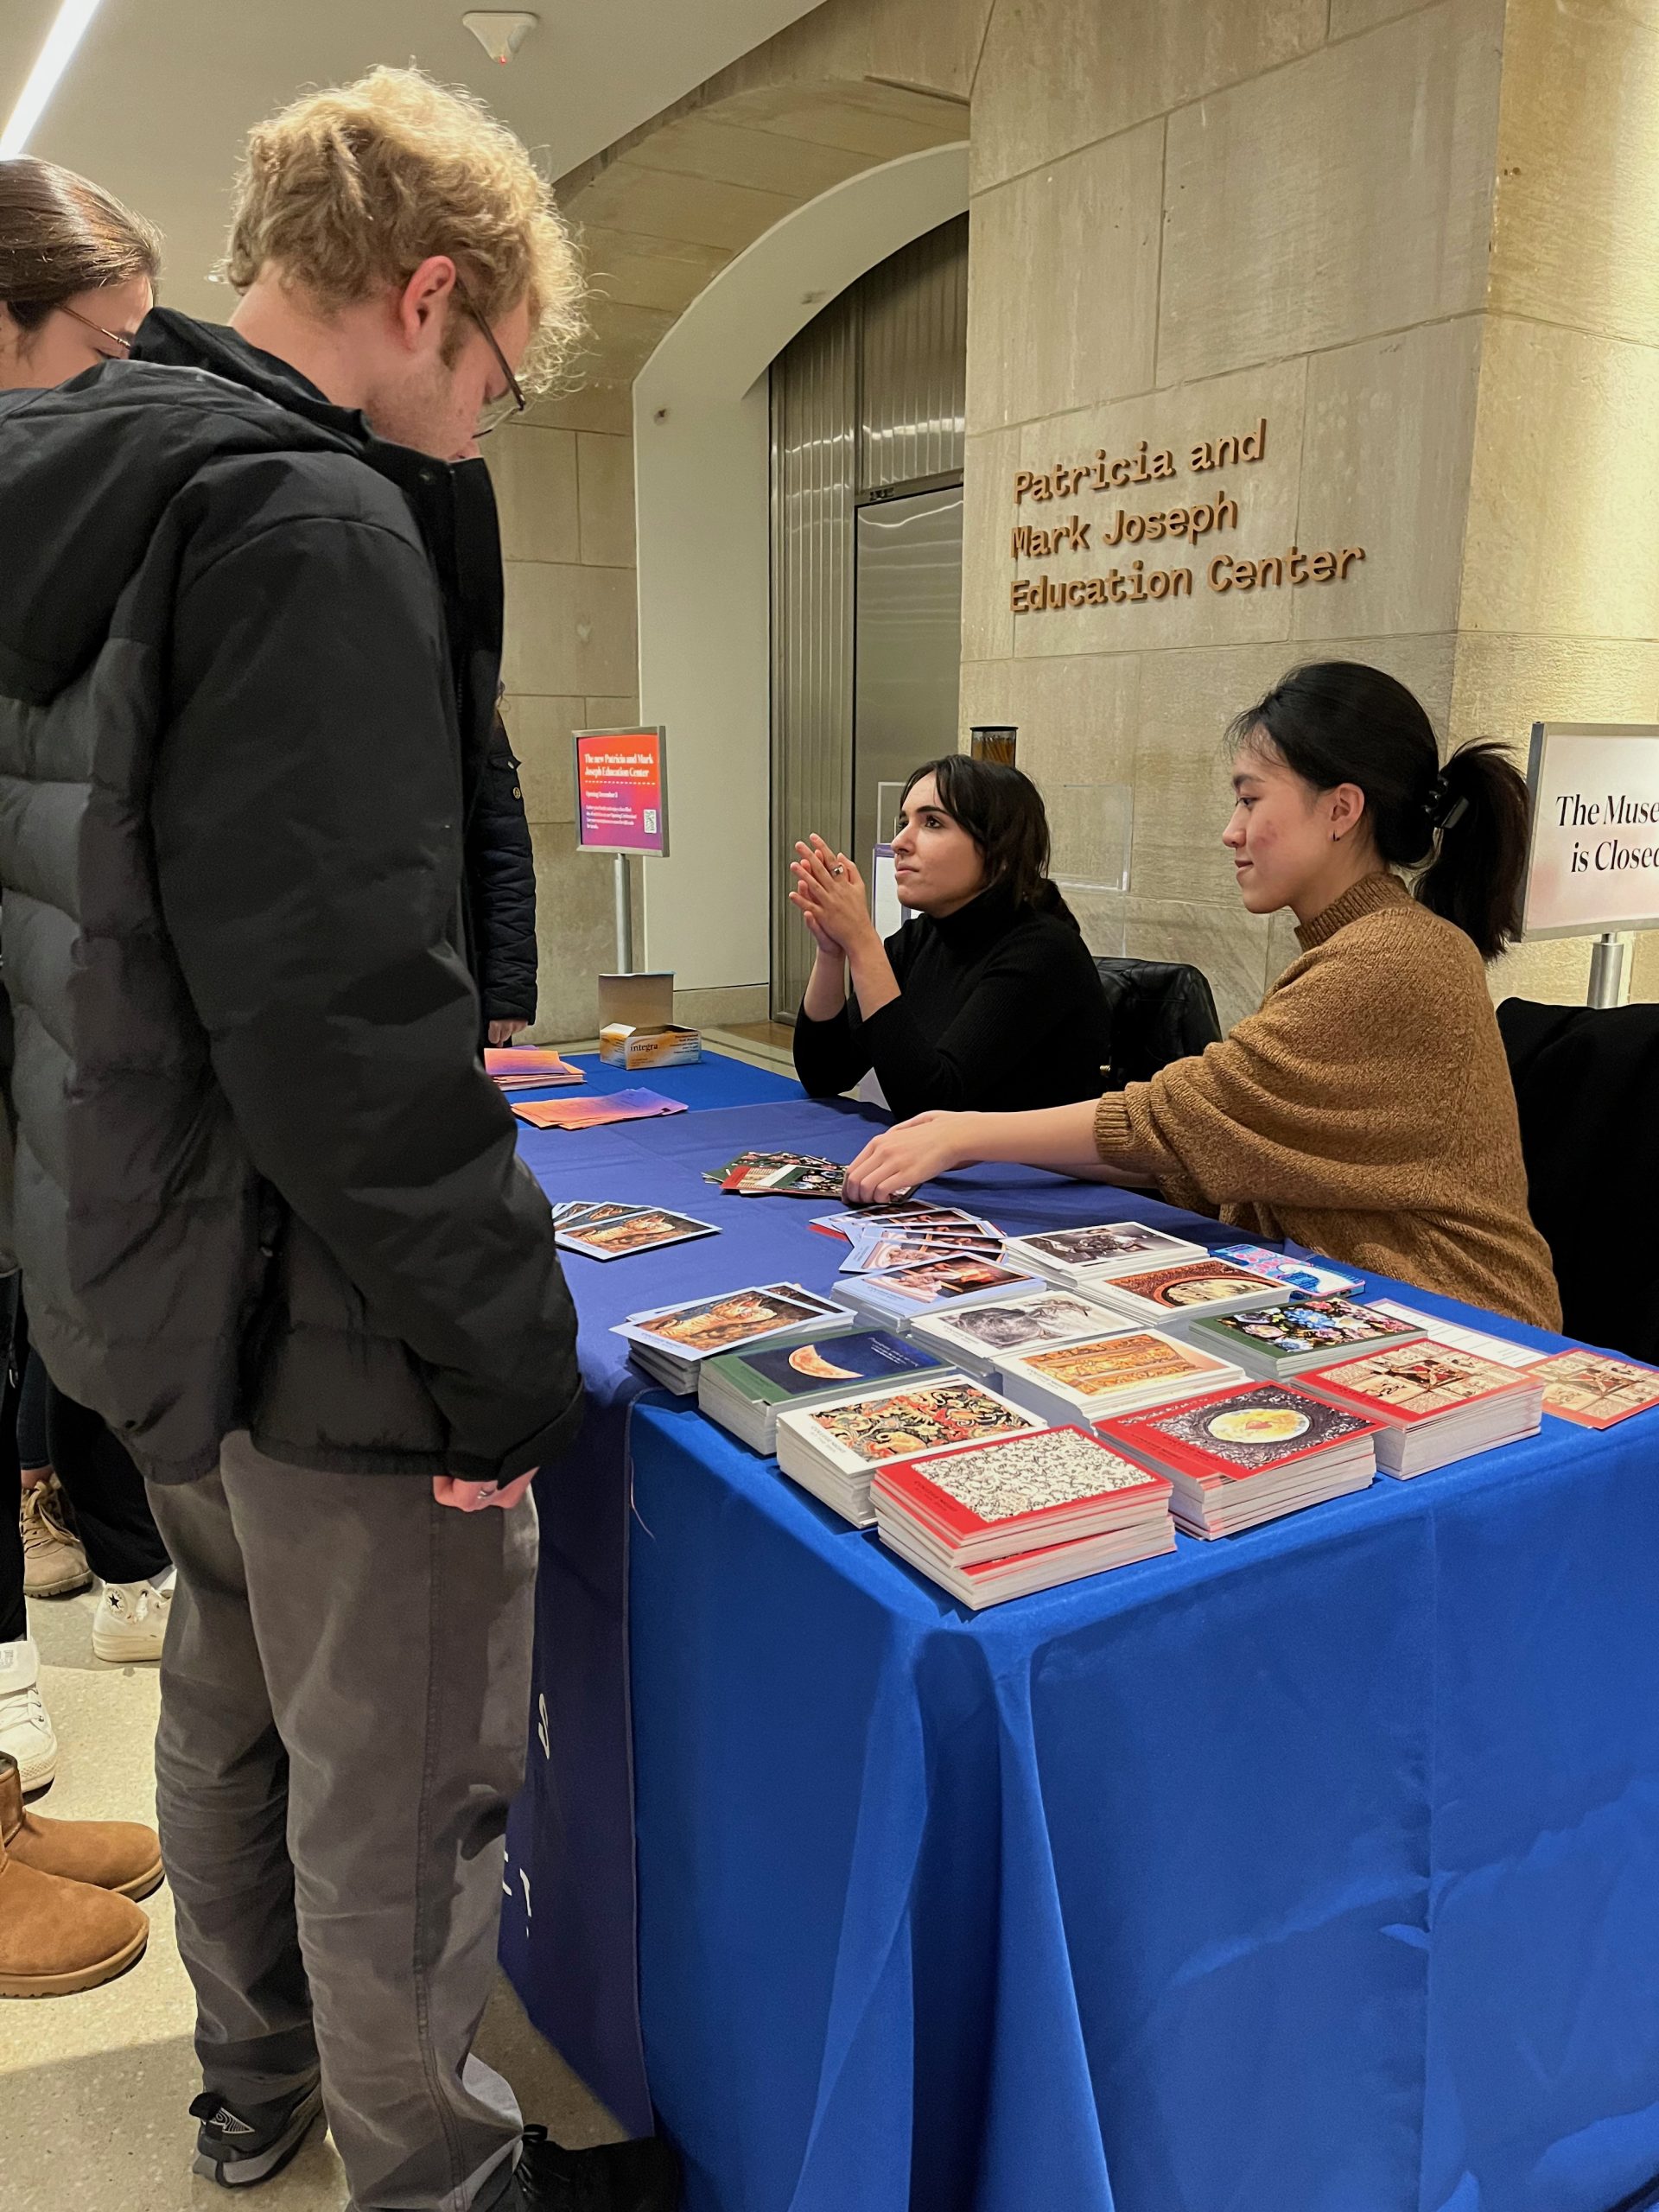 Two students sit at an event sign-in table and face a standing student. Postcards appear on the table.